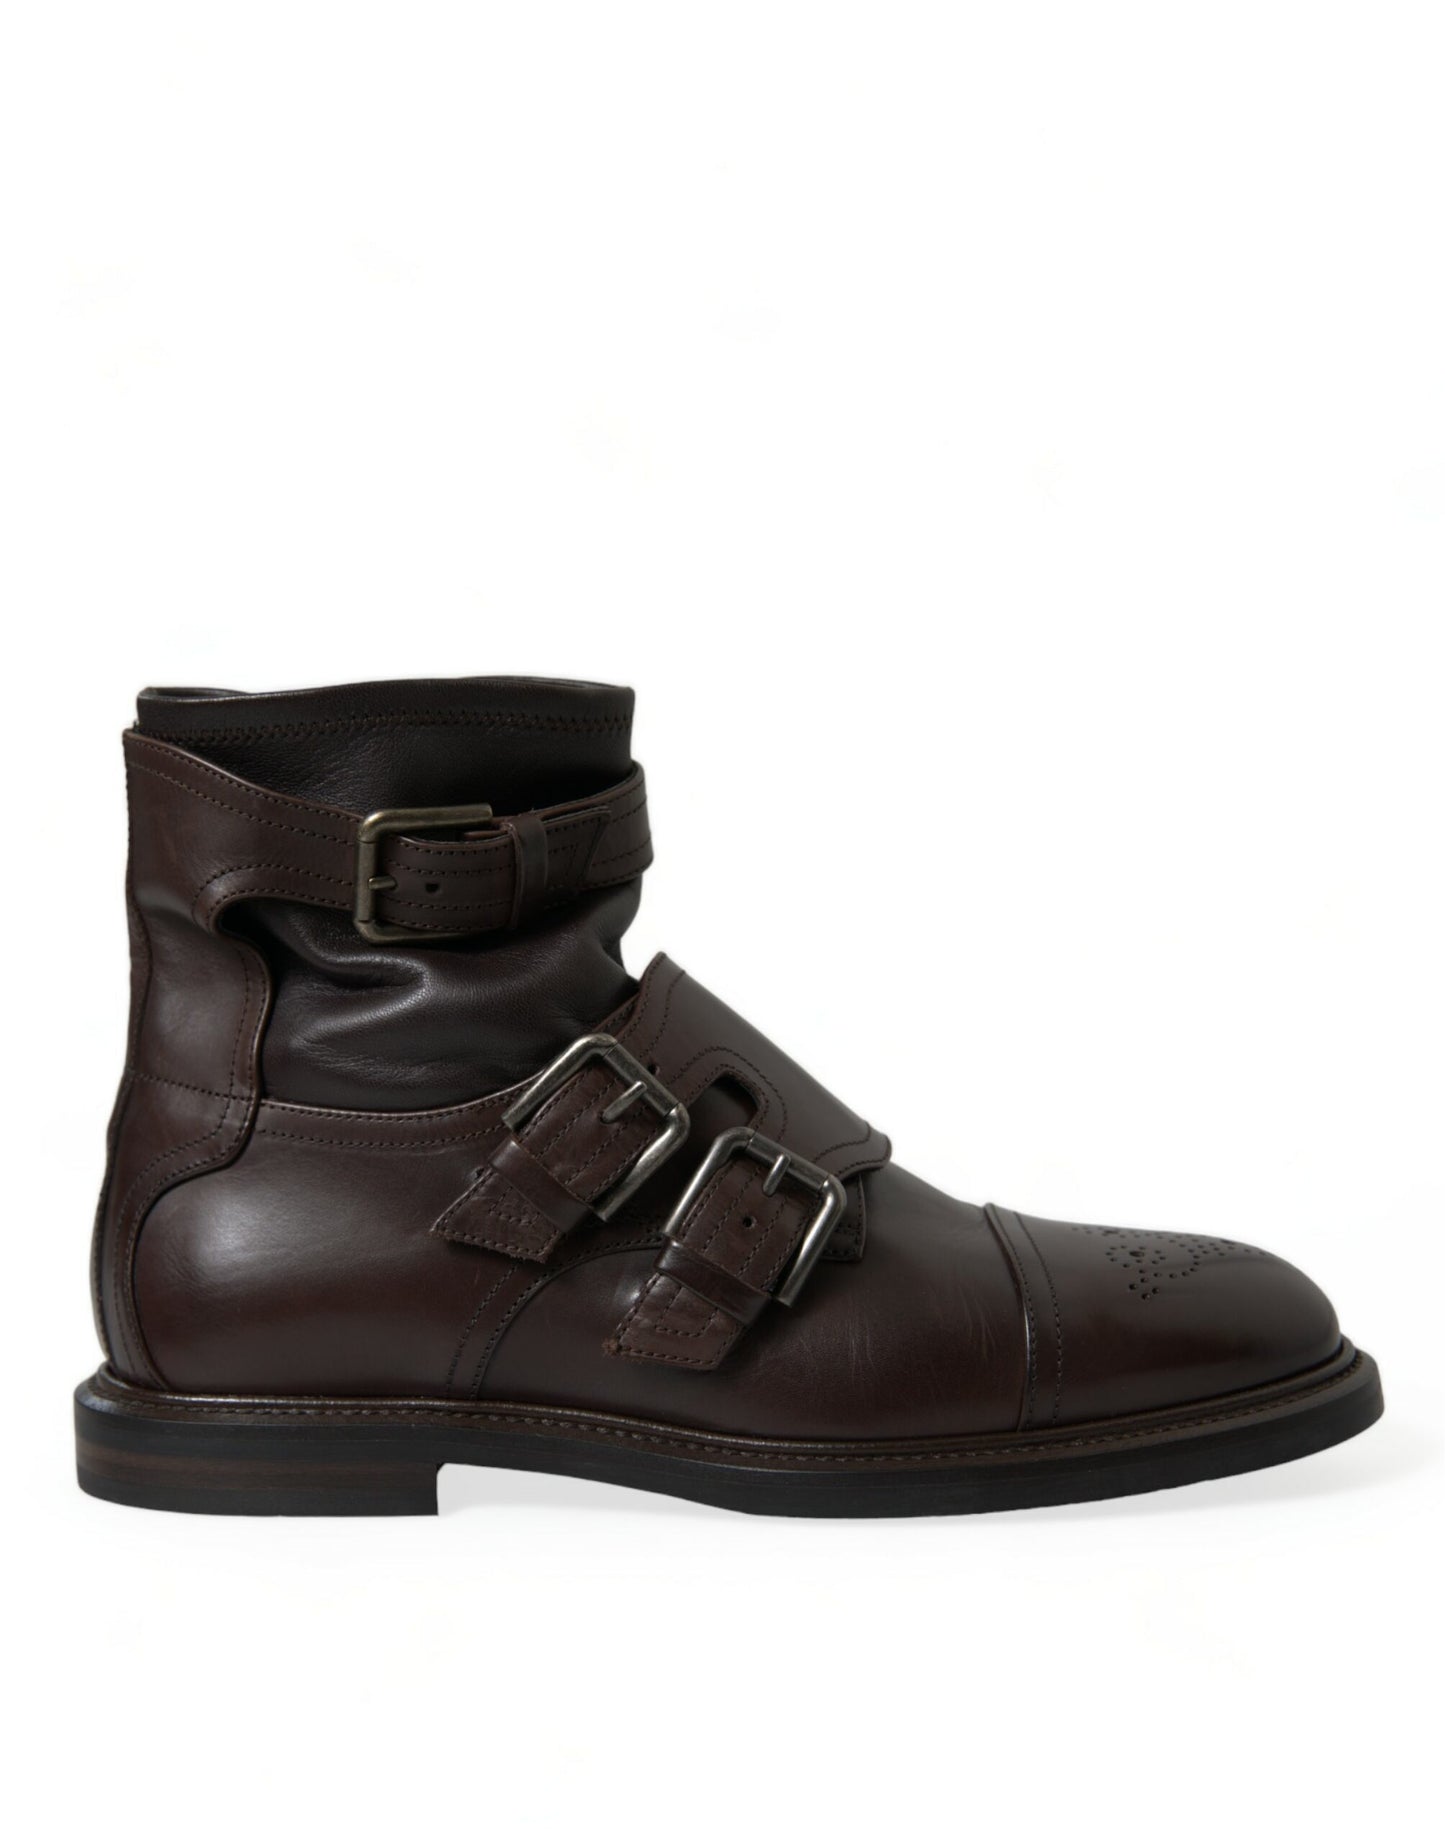 Dolce & gabbana mens leather ankle boots